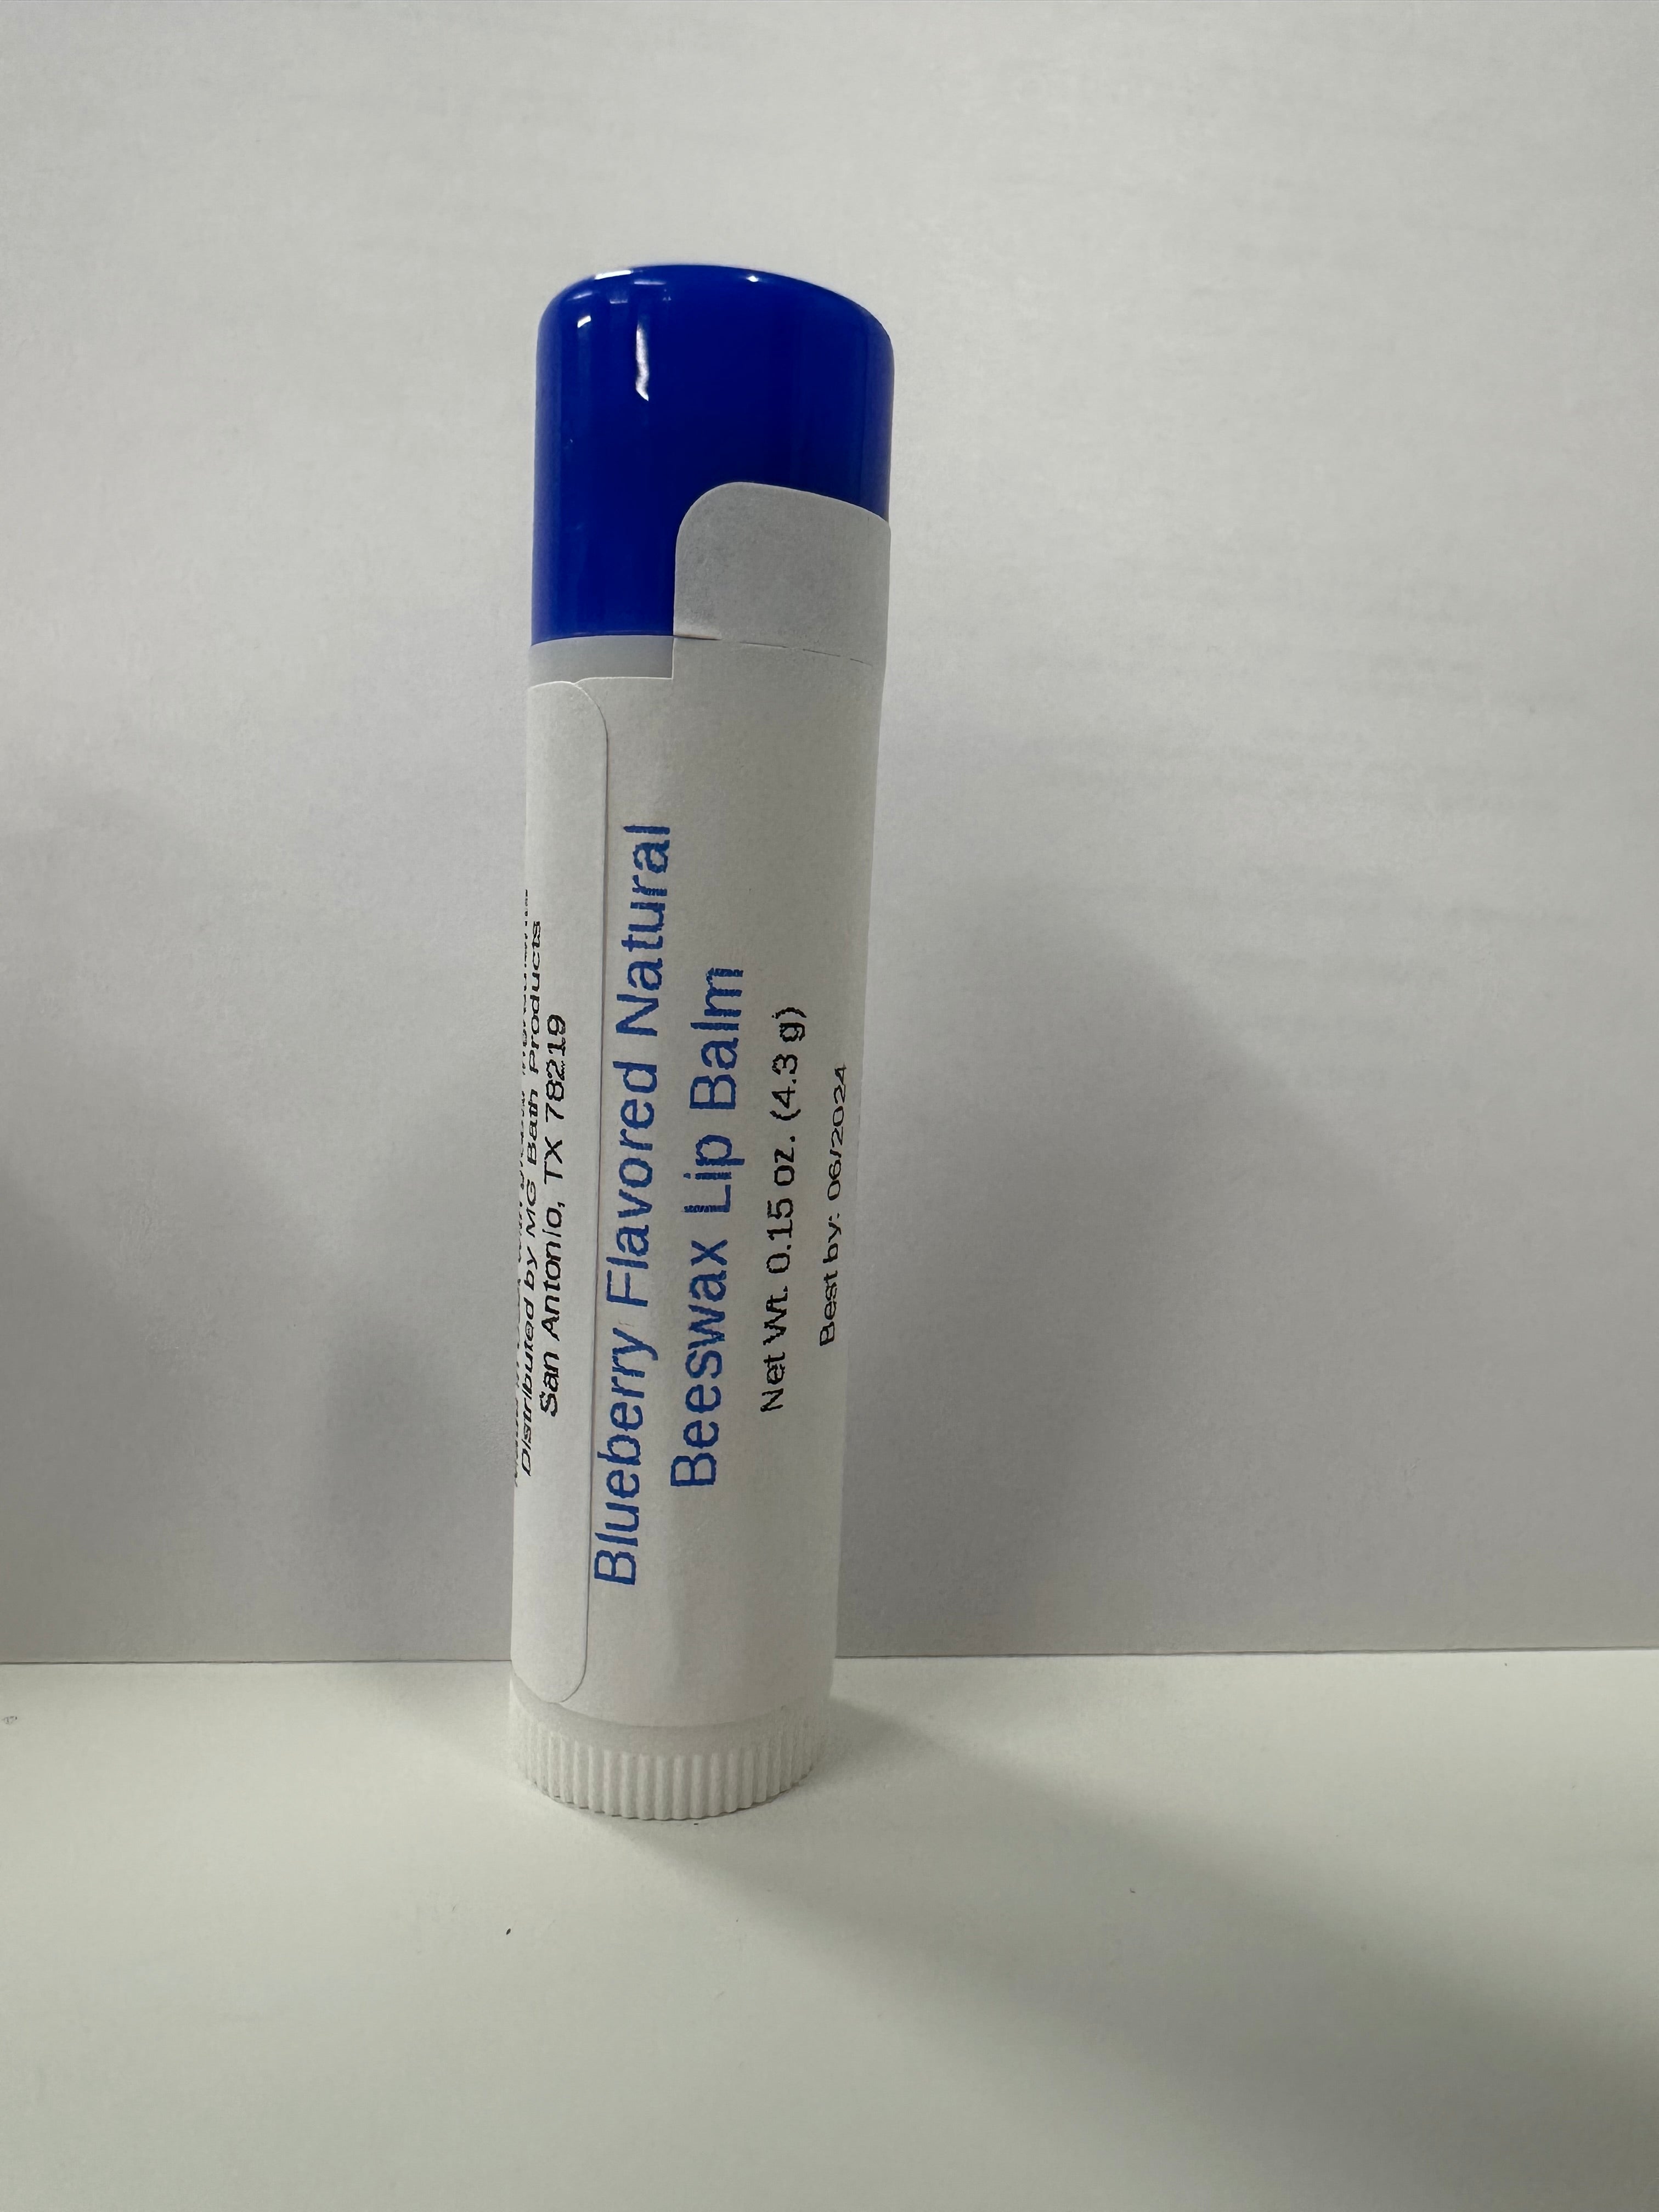 Lip balm in tube that has a blue colored cap on it.